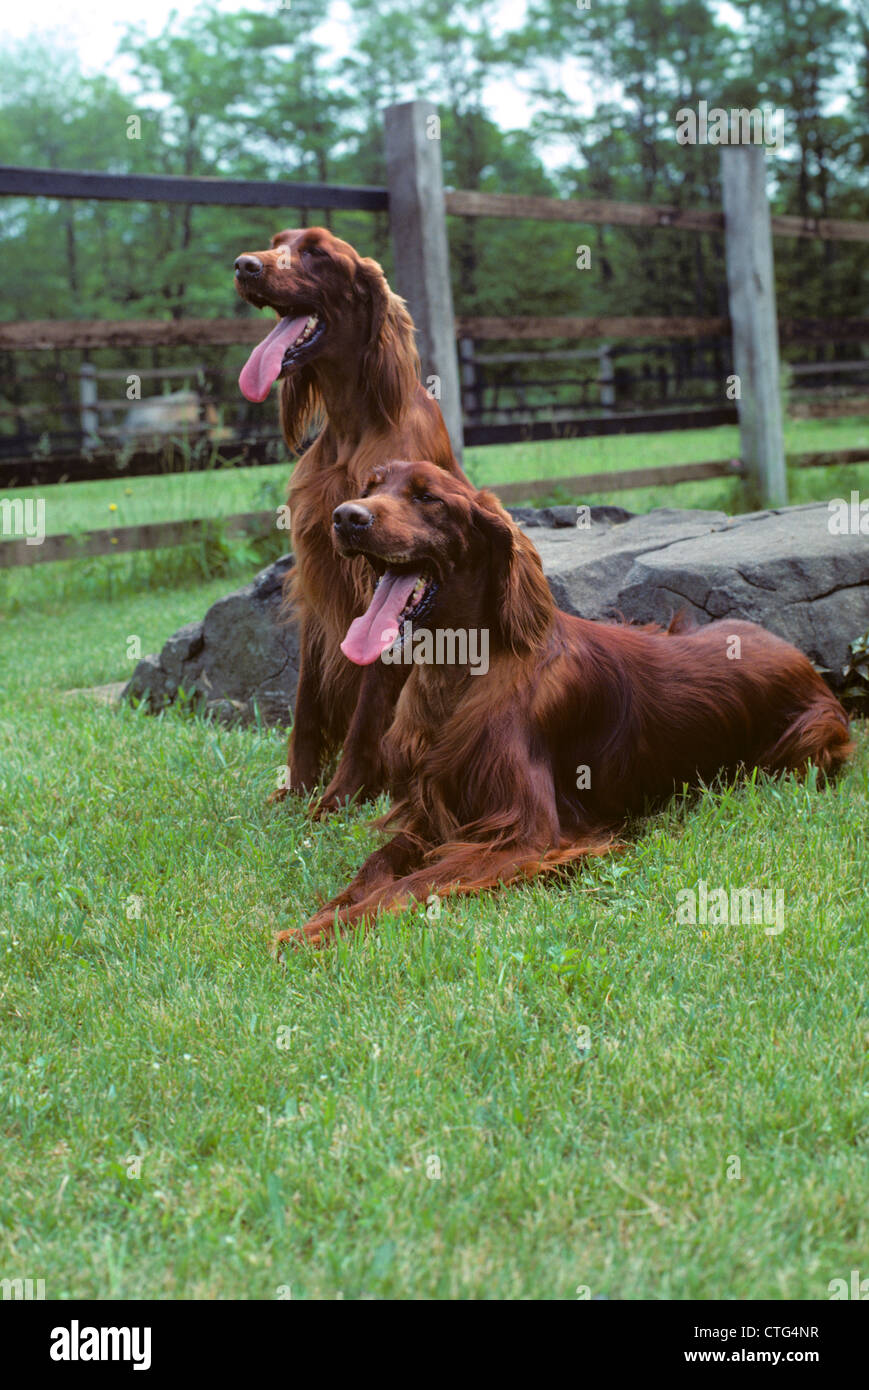 TWO IRISH SETTER DOGS OUTDOORS IN GRASS Stock Photo